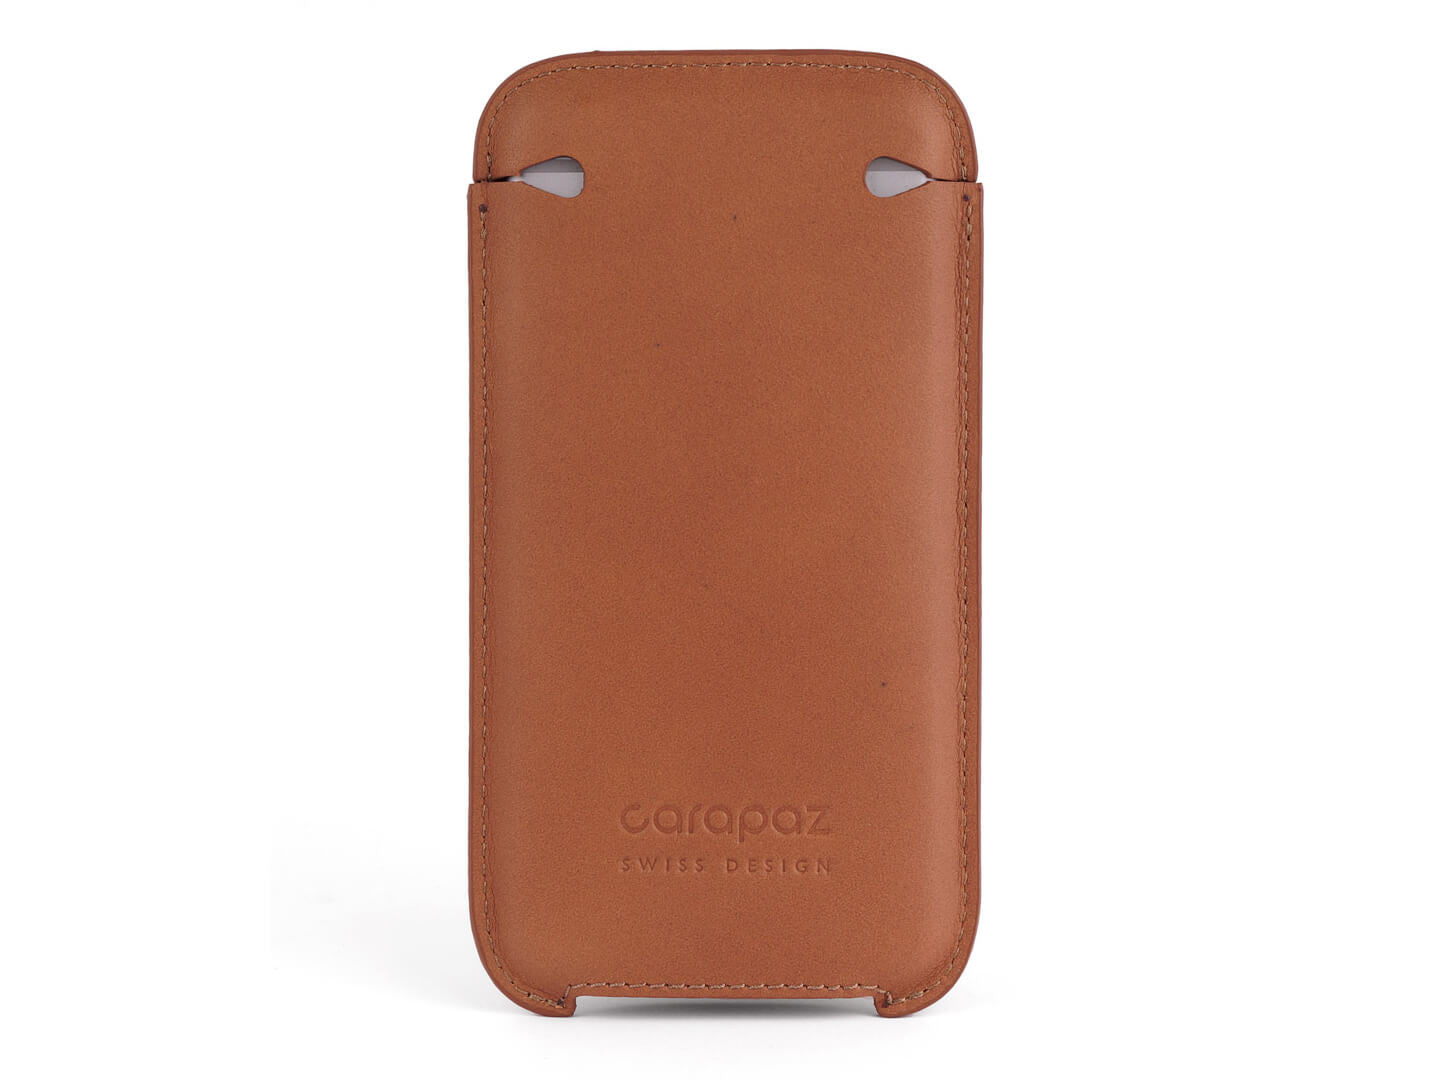 iPhone 6 / 7 / 8 leather pouch sleeve protective slim case natural leather veg-tan - Carapaz